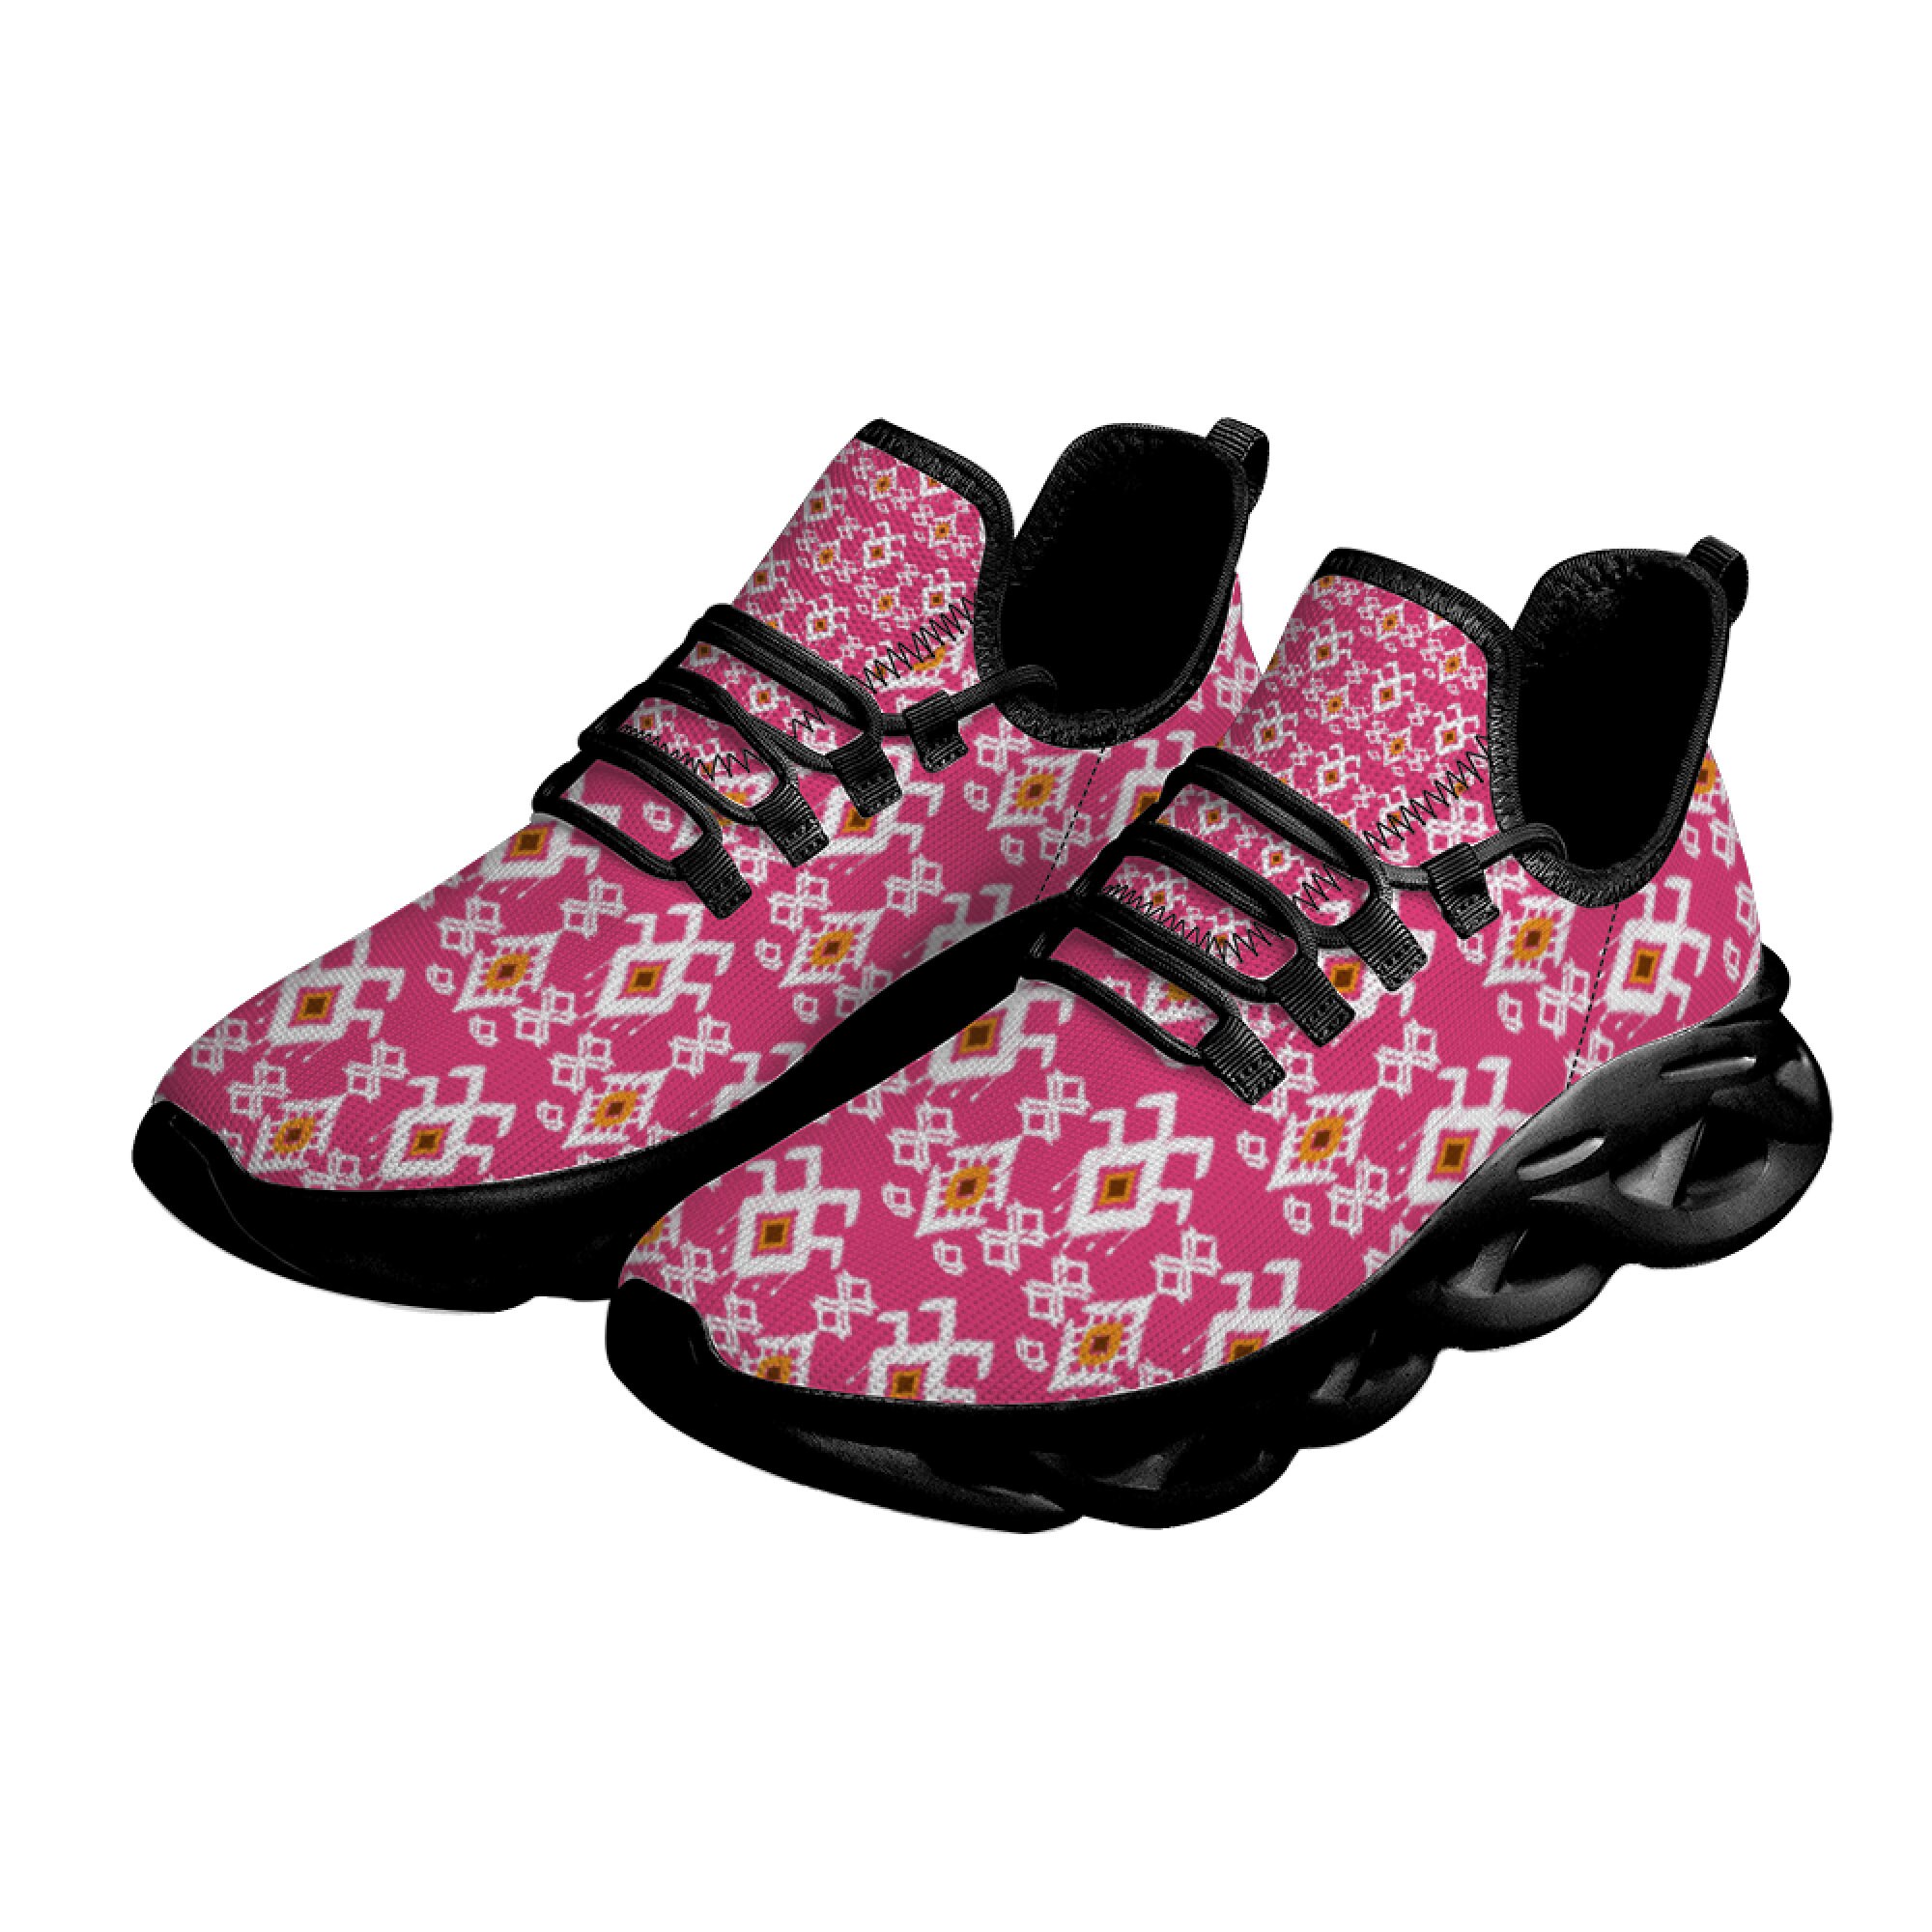 INSTANTARTS African Girls Tribal Fabric Kint Shoes for Women